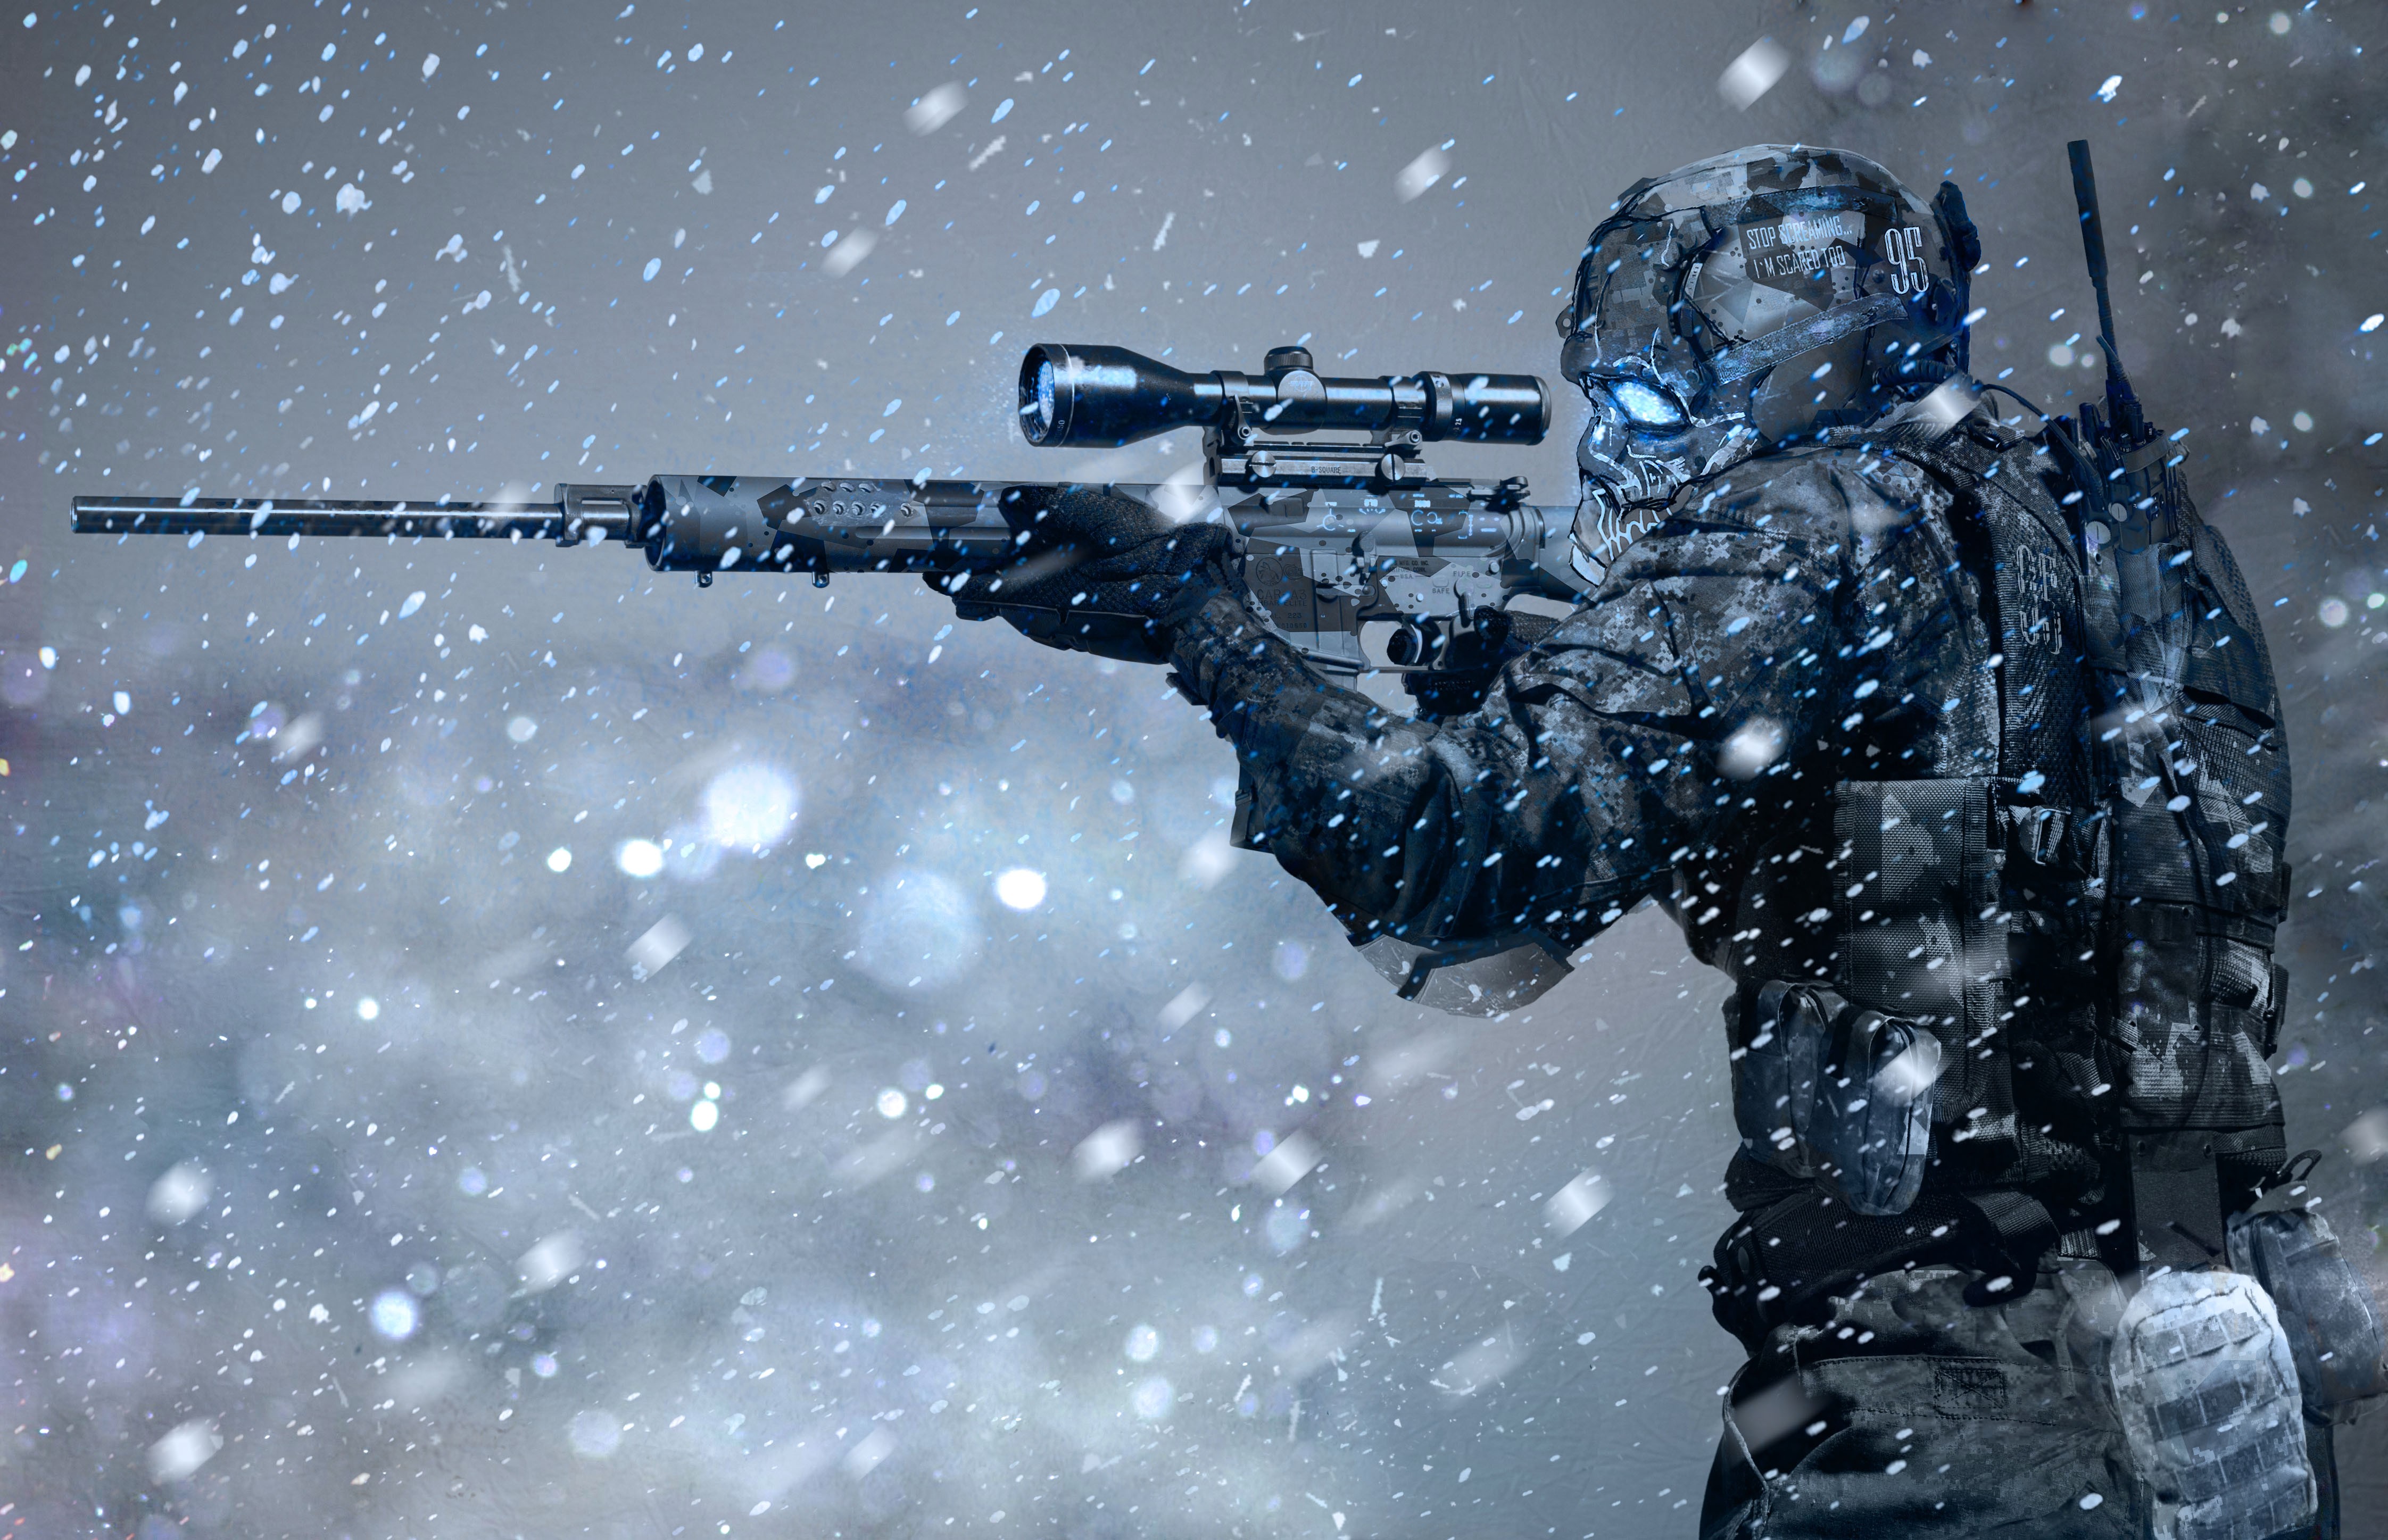 Soldier Sniper Rifle Winter Snow Science Fiction Futuristic Special Forces 4488x2895